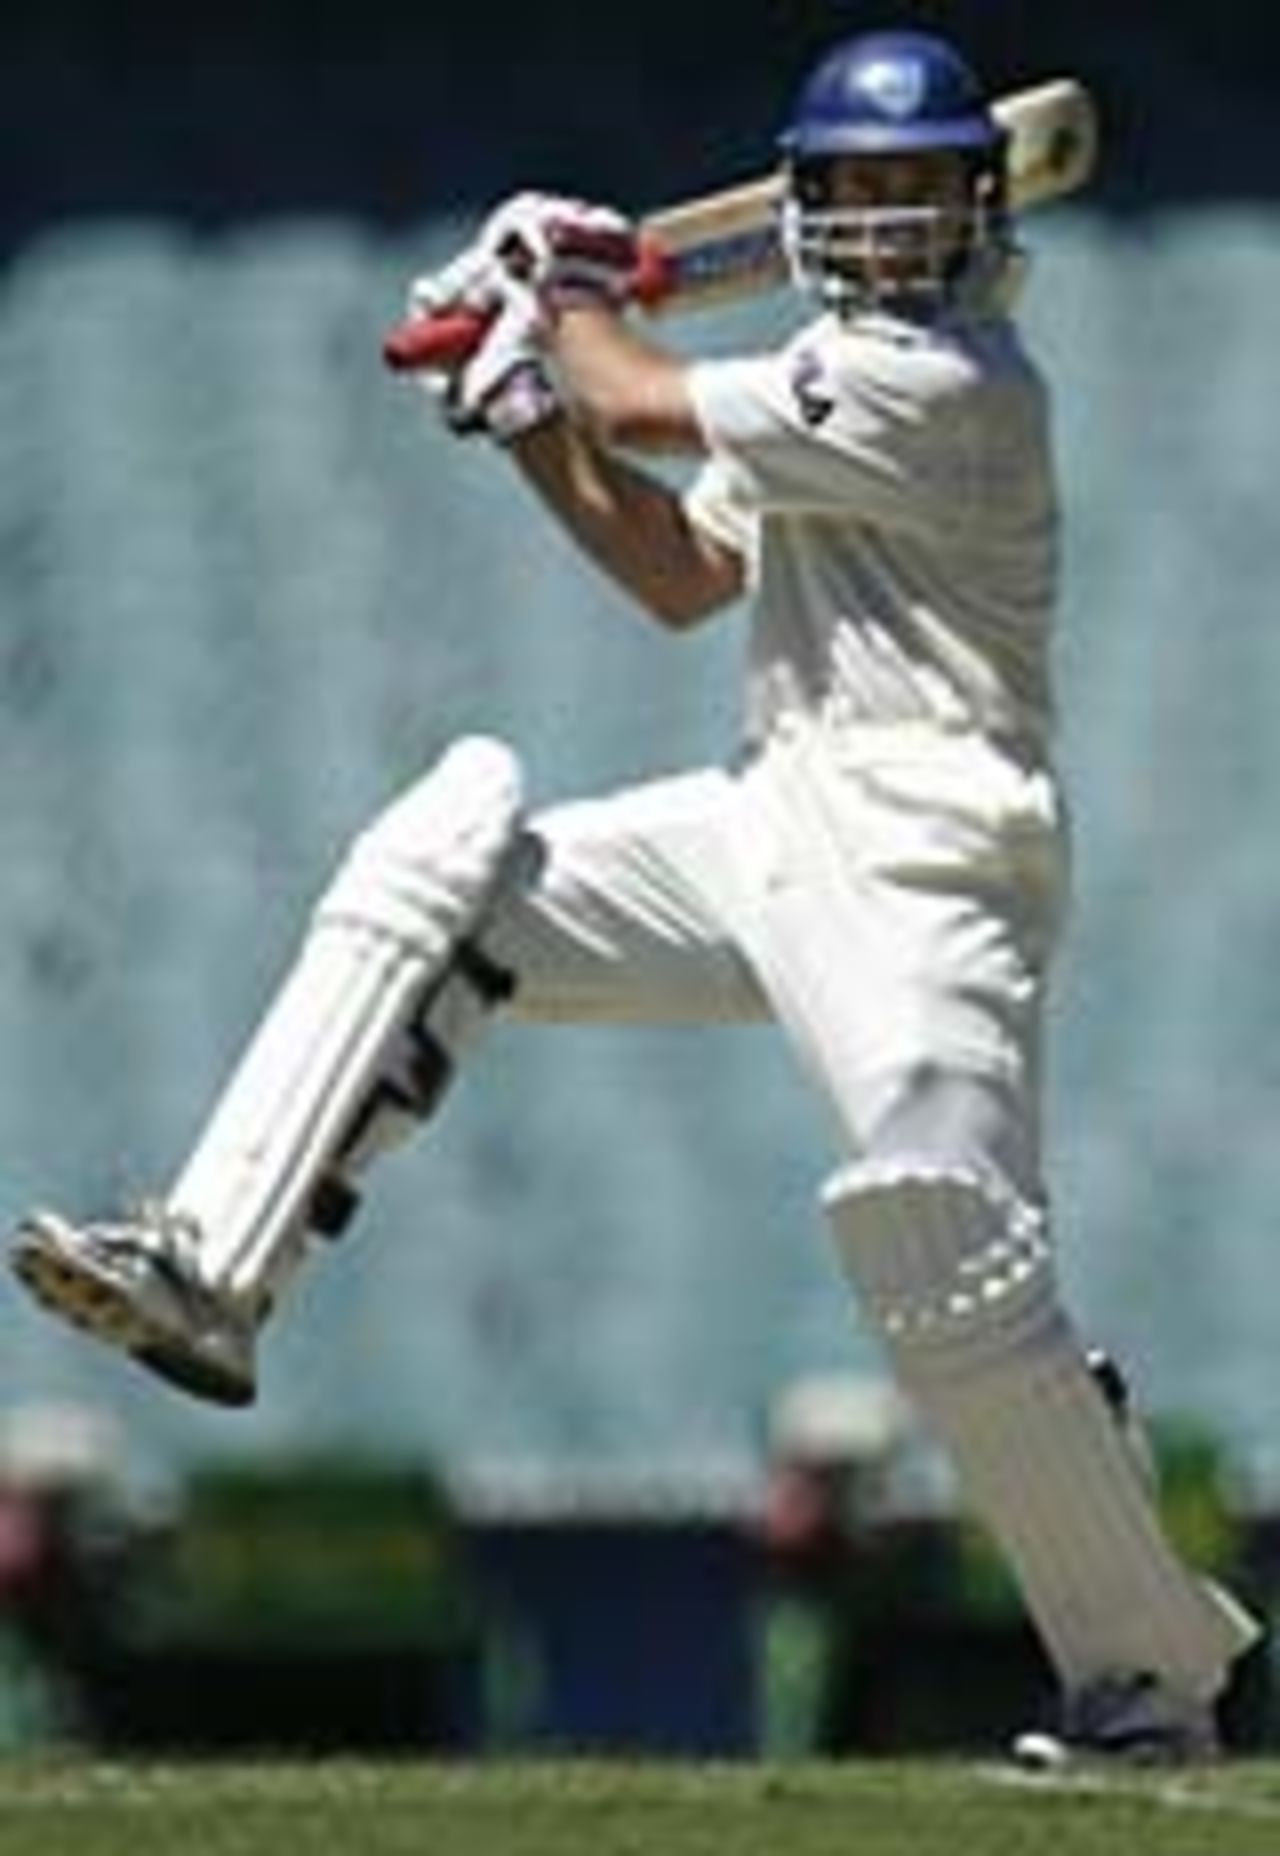 Michael Bevan hits out on his way to a hundred, Victoria v New South Wales, Melbourne, December 13, 2003